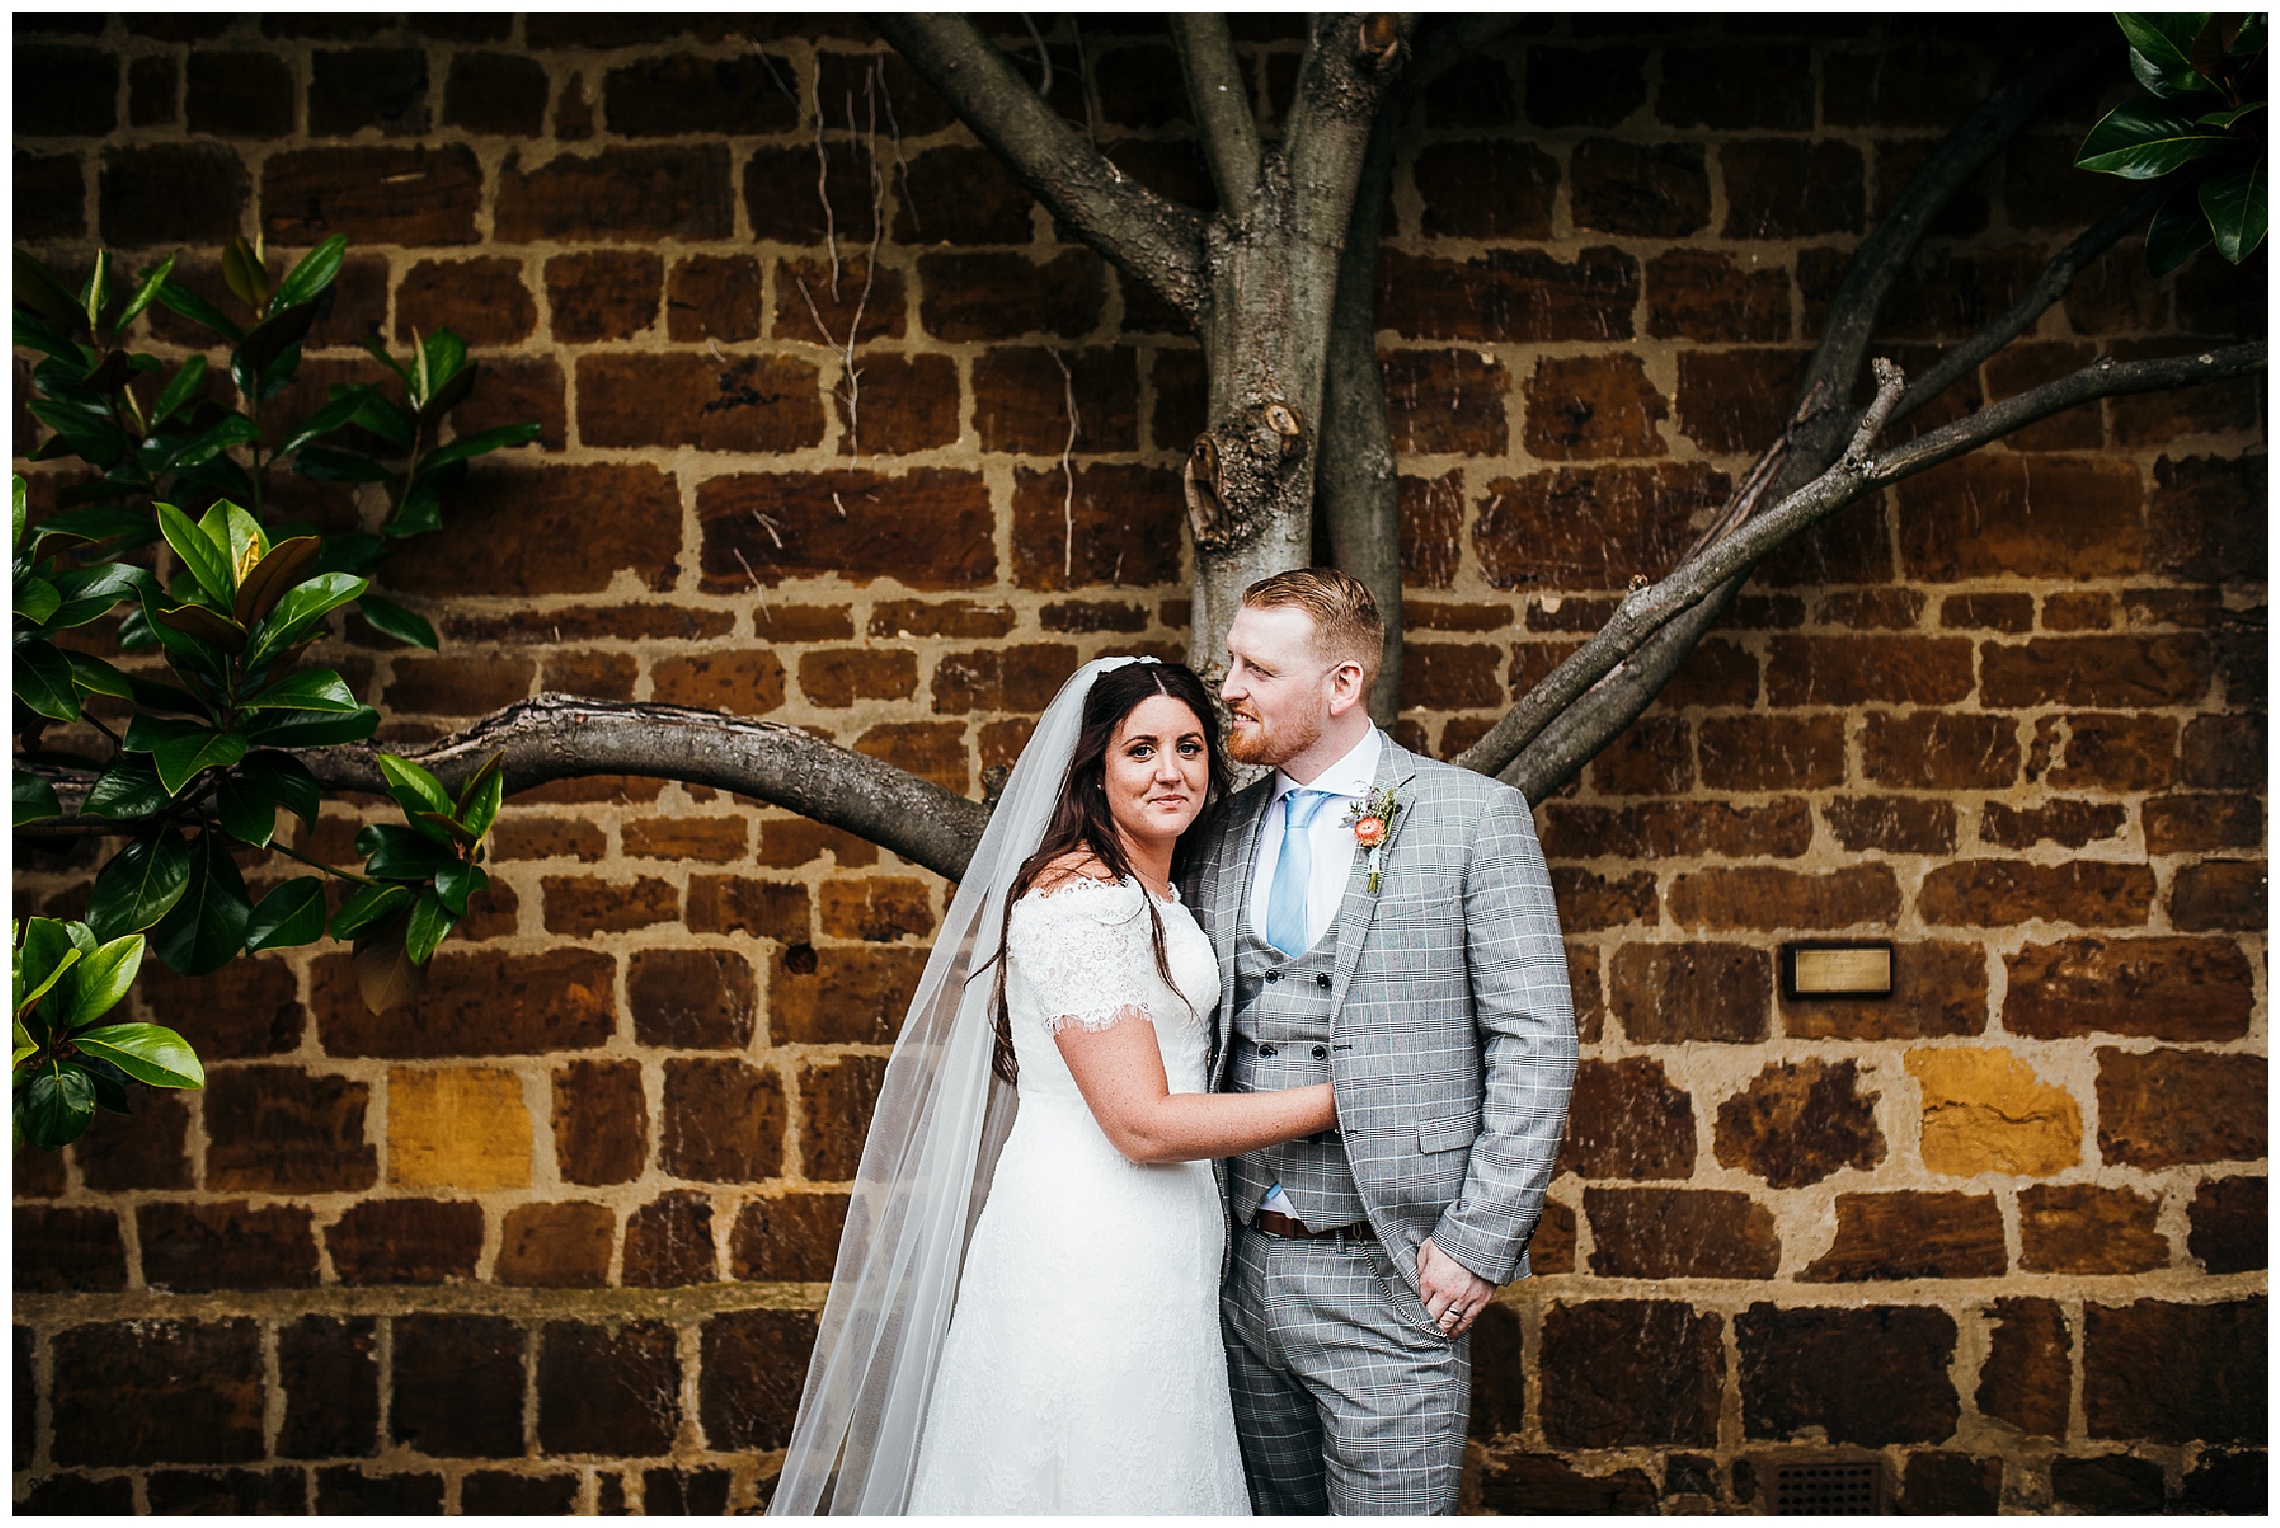 bride and groom stand together in front of tree and brick wall